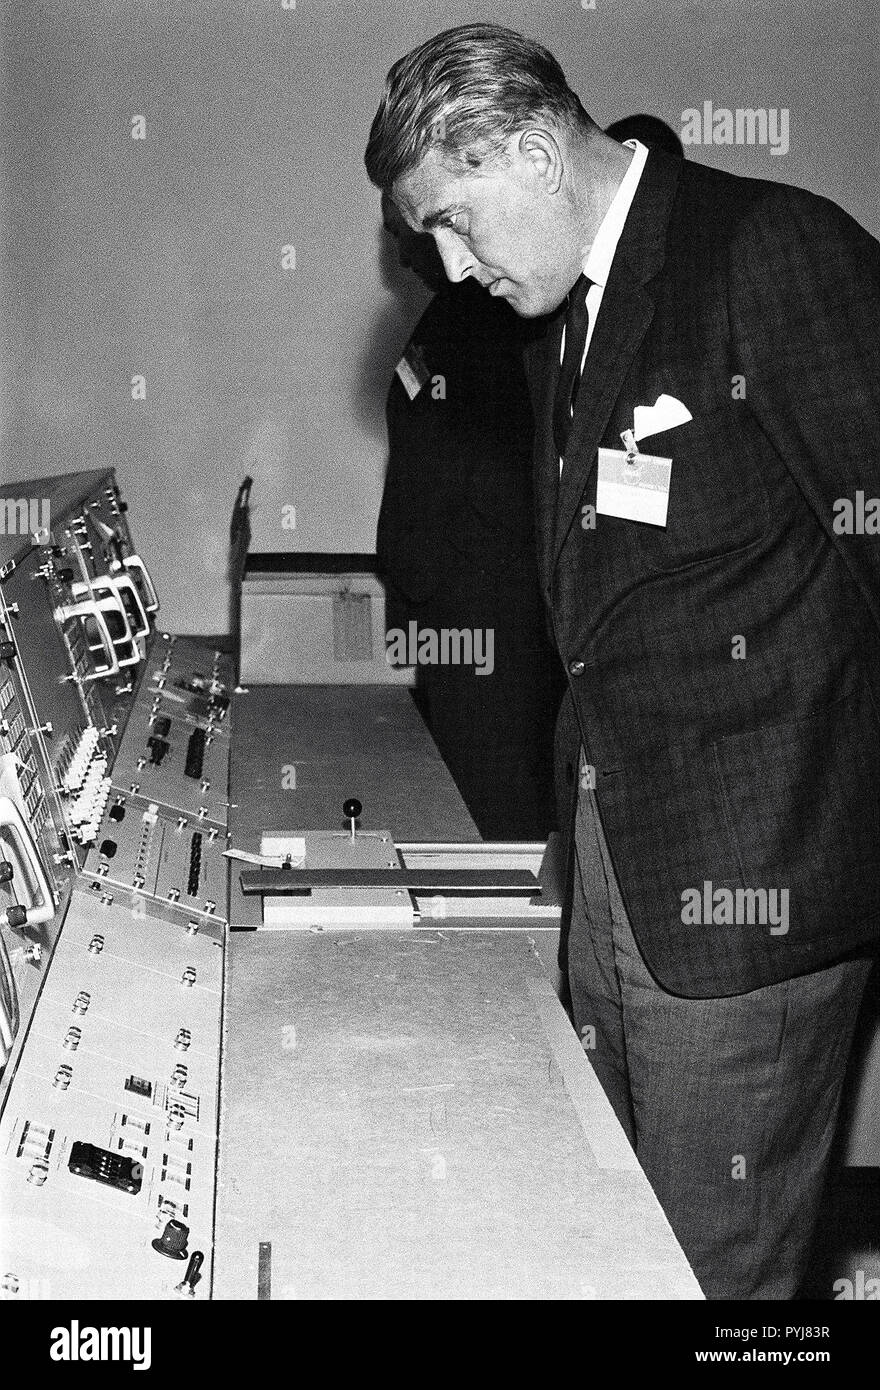 This photograph, dated October 14, 1964, was taken at the Marned Spacecraft Center, now the Johnson Space Center in Houston, Texas. Dr. von Braun is shown looking over consoles in the Manned Spaceflight Control Center. Stock Photo